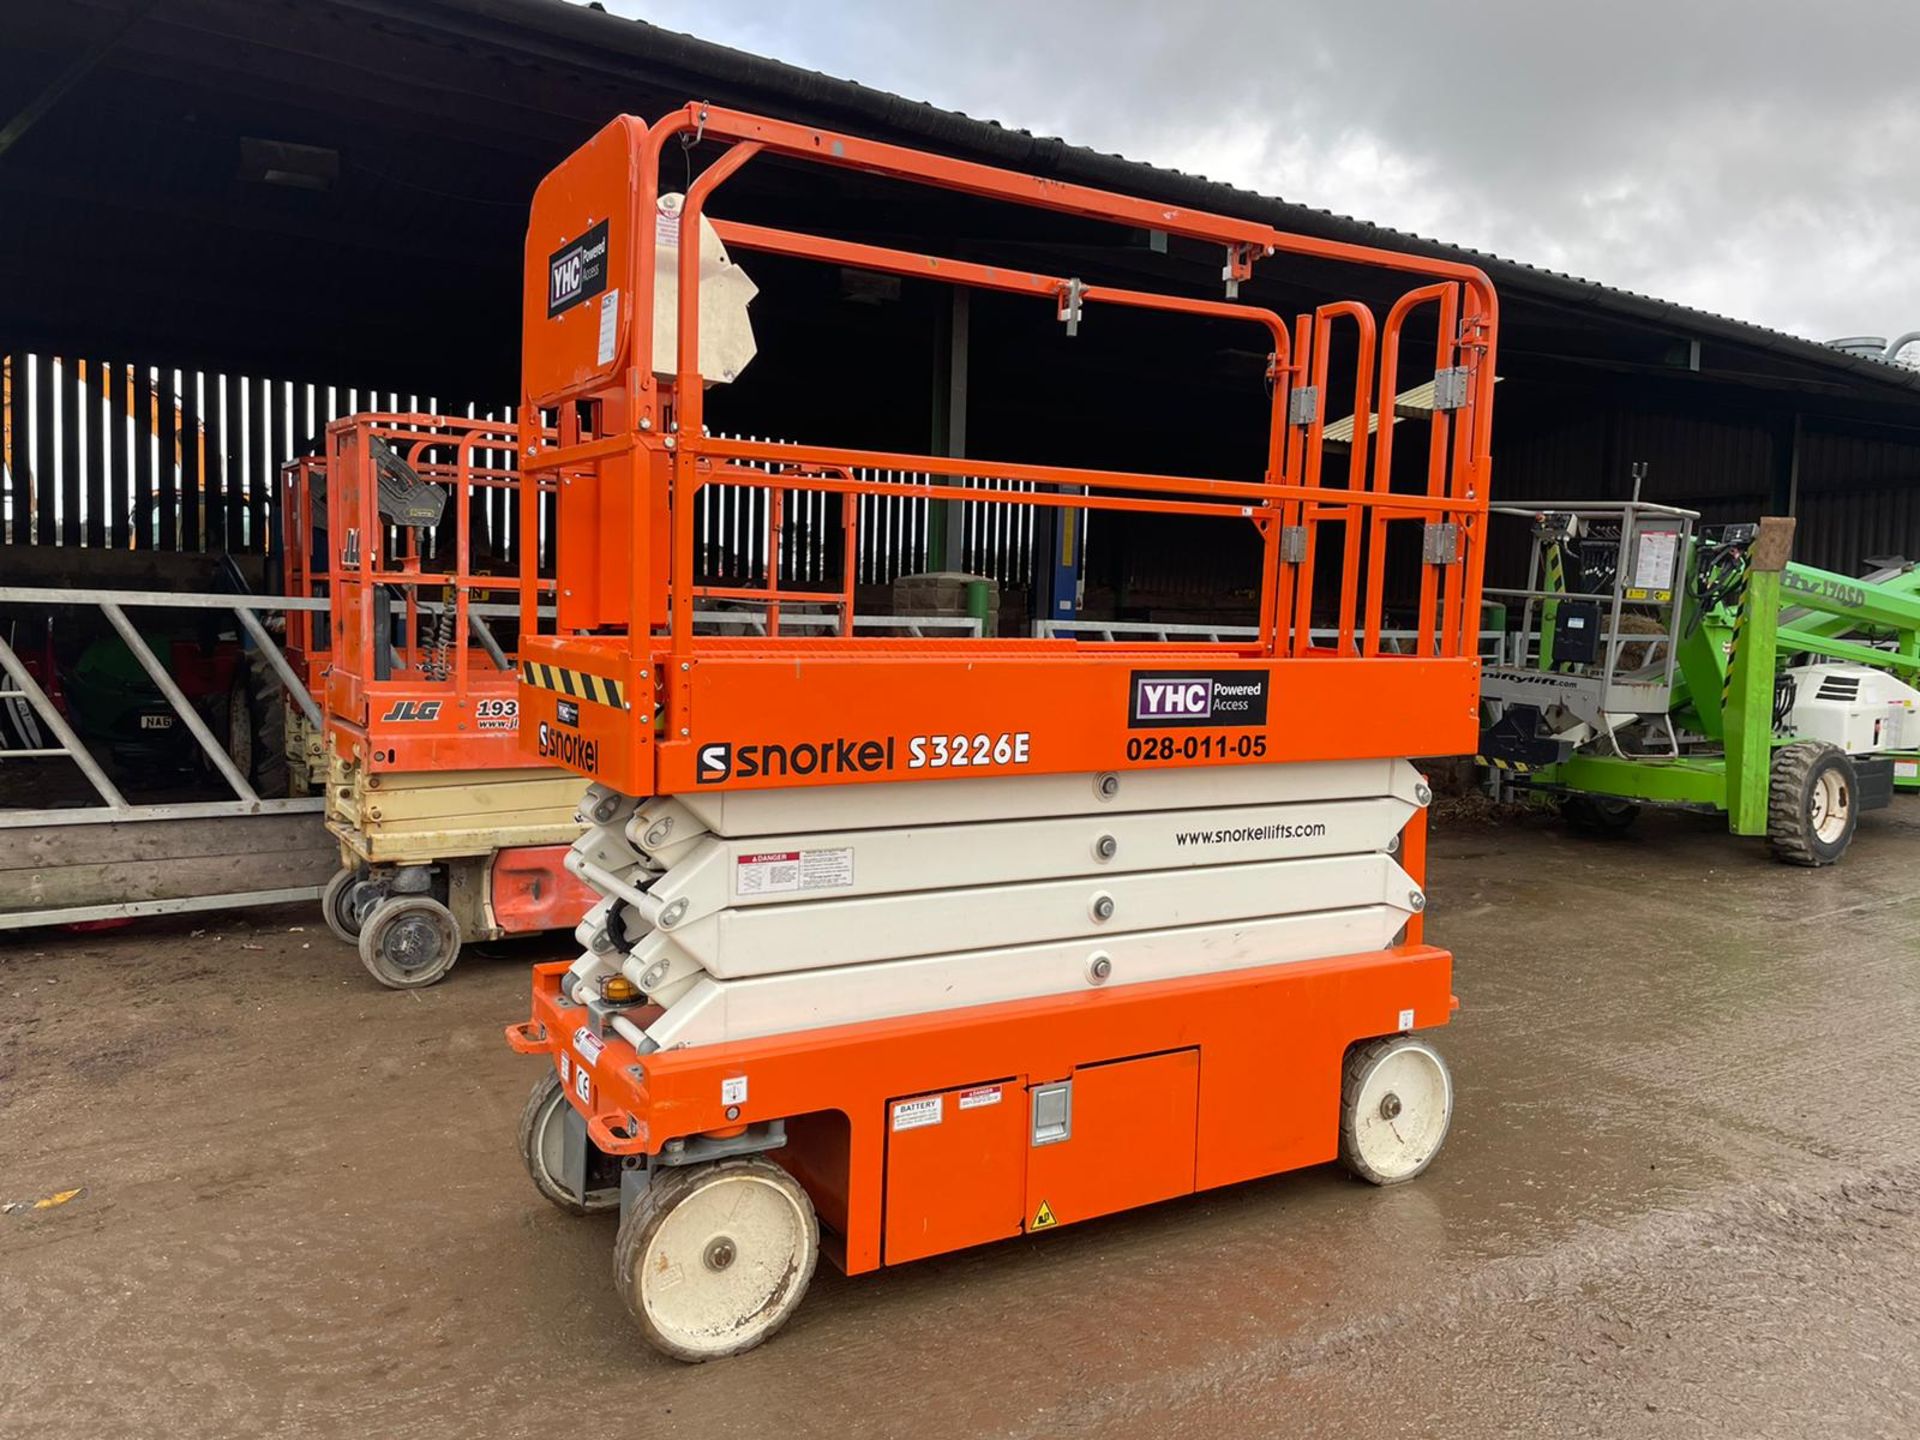 2018 SNORKEL S3226E ELECTRIC SCISSOR LIFT, DRIVES AND LIFTS, CLEAN MACHINE, EX DEMO CONDITION - Image 6 of 6